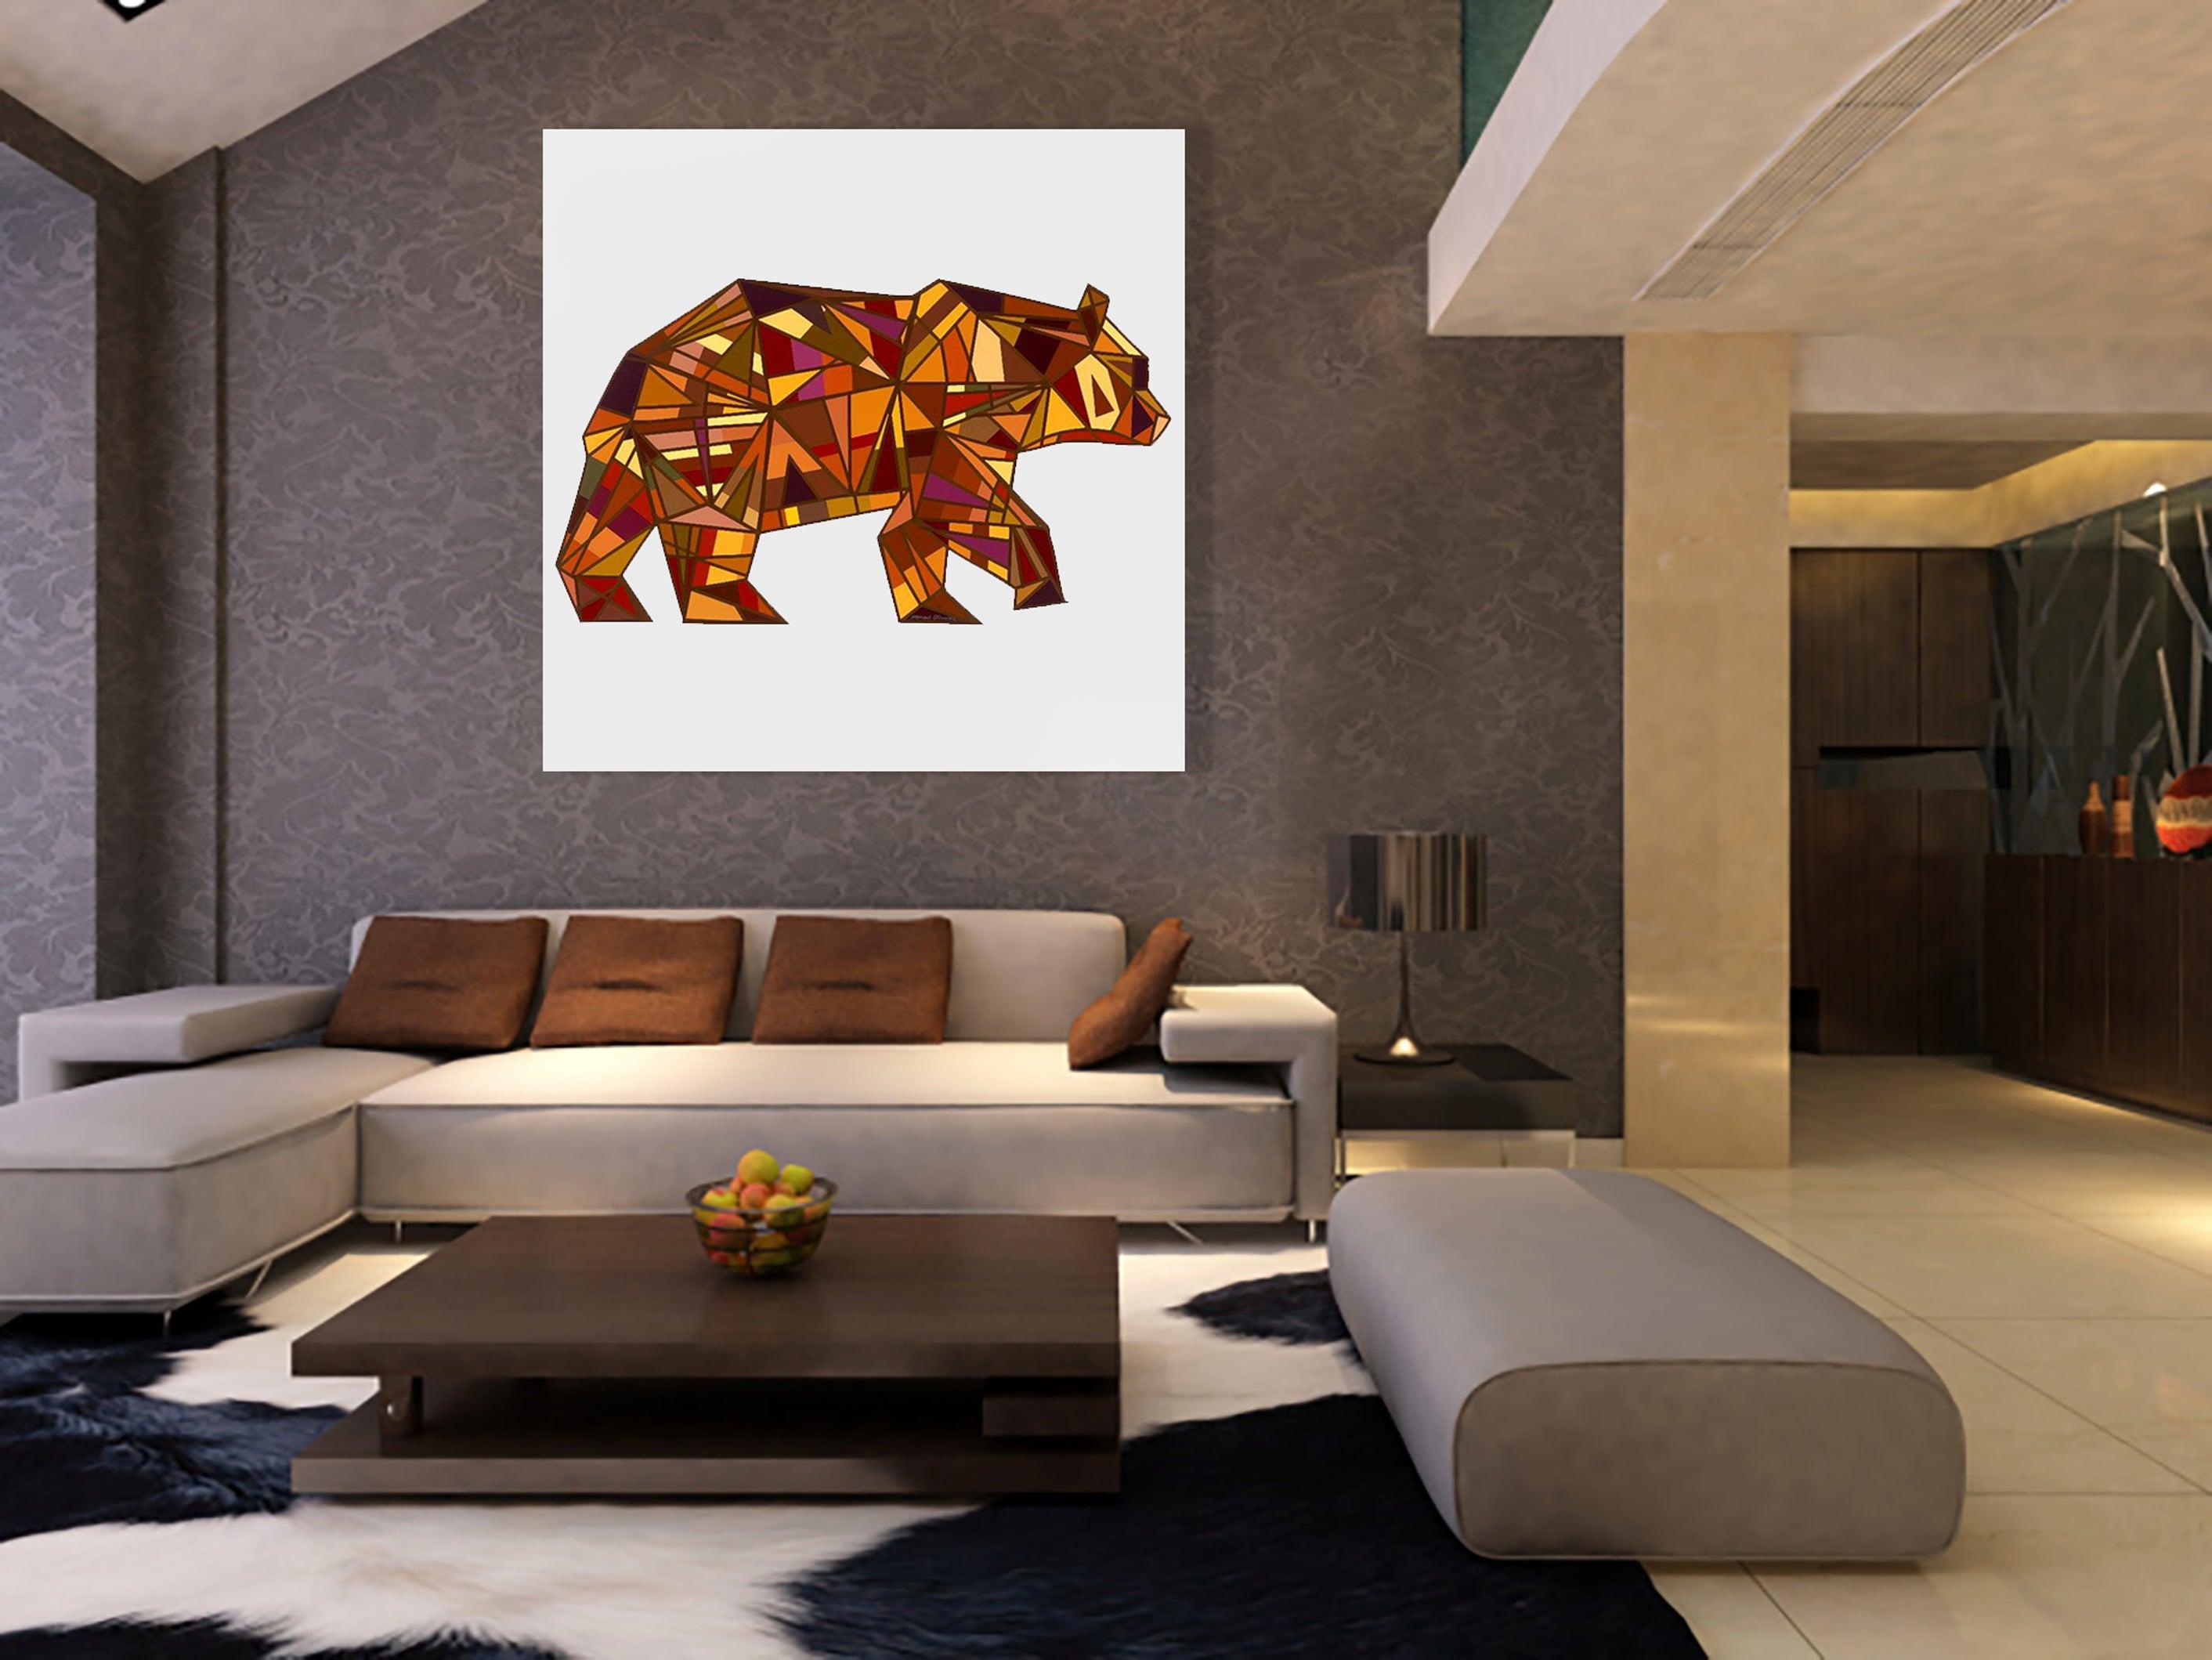 The Lucky Bear (Original Collage Artwork) - Contemporary Mixed Media Art by Mauro Oliveira